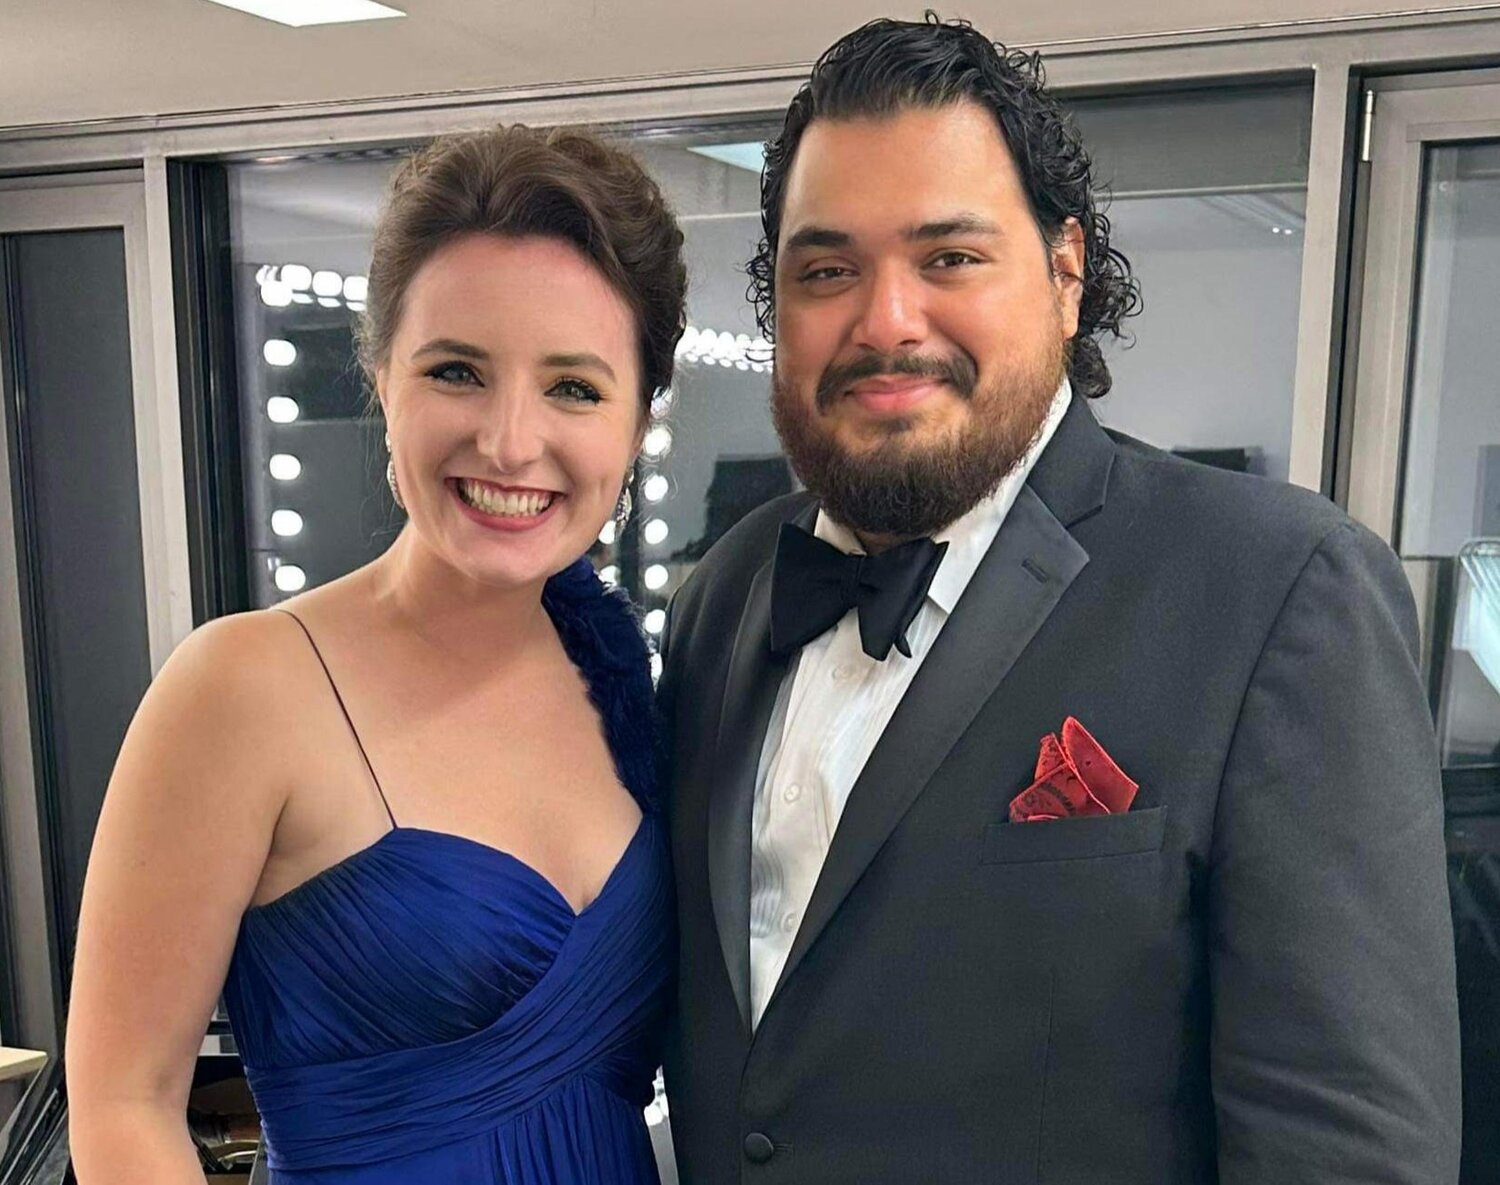 Soprano Emily Margevich, left, and tenor Angel Gomez will perform at Kindred Spirits' Opera Extravaganza on Friday, October 6.